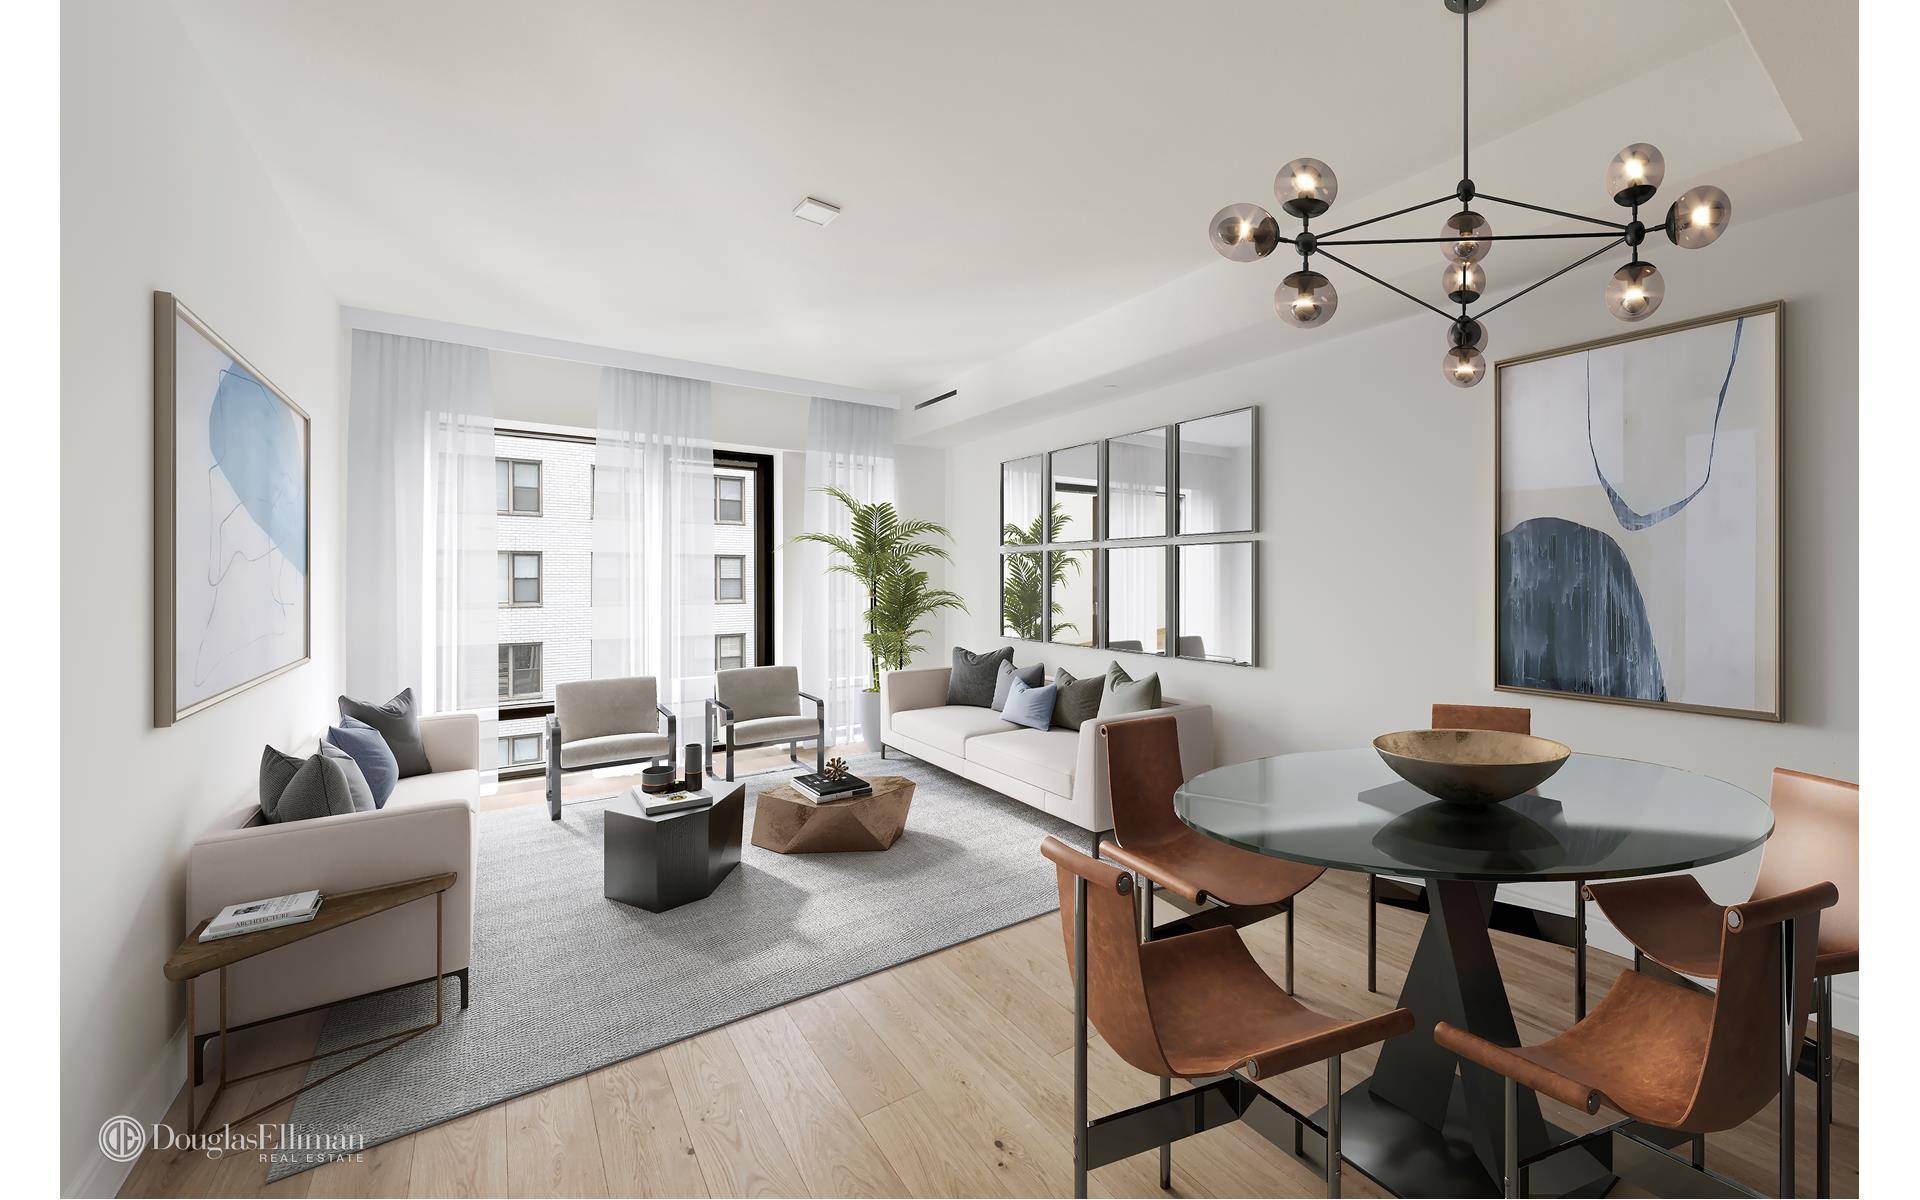 OVER 80 SOLD CLOSINGS HAVE COMMENCEDBy Appointment Only Residence 5E at 200 East 21st Street is a stunning 1, 030 square foot 1 bedroom, 1.